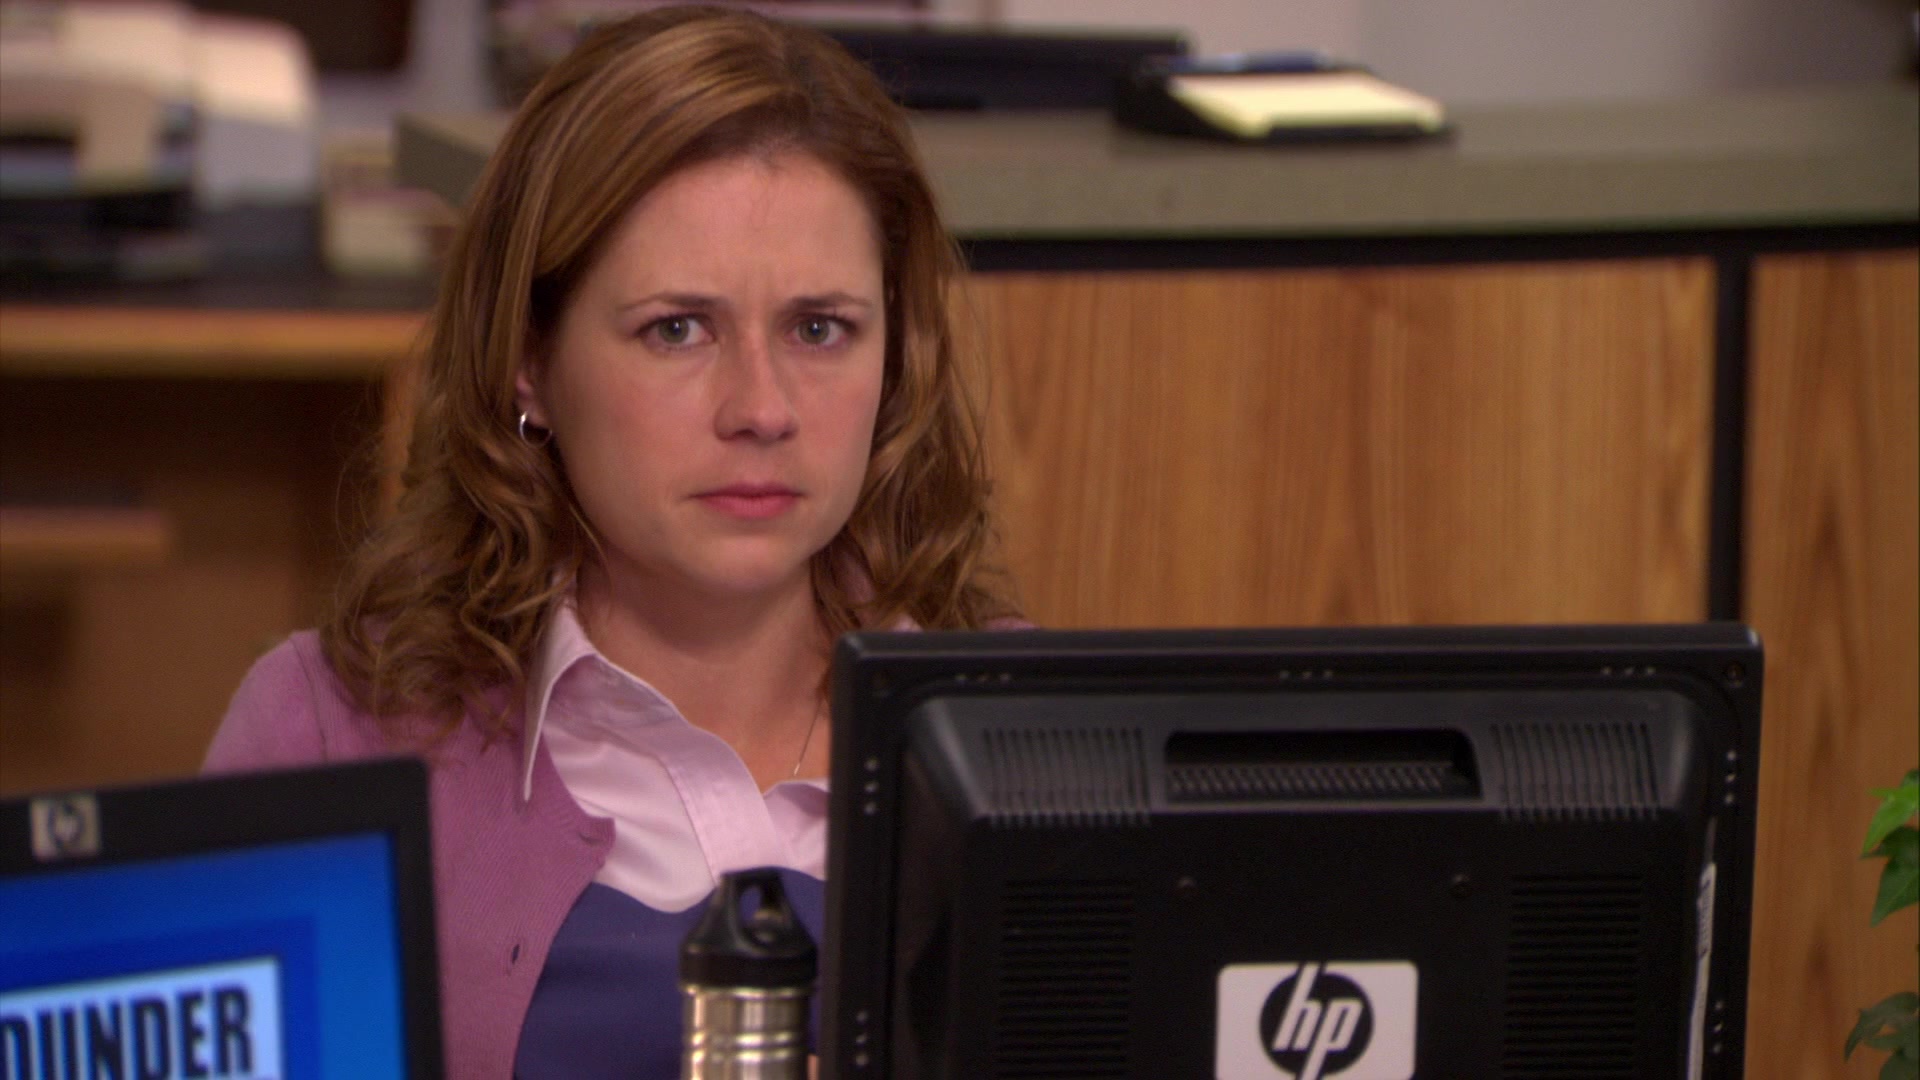 HP Monitor Used by Jenna Fischer (Pam Beesly) in The Office - Season 6, Epi...